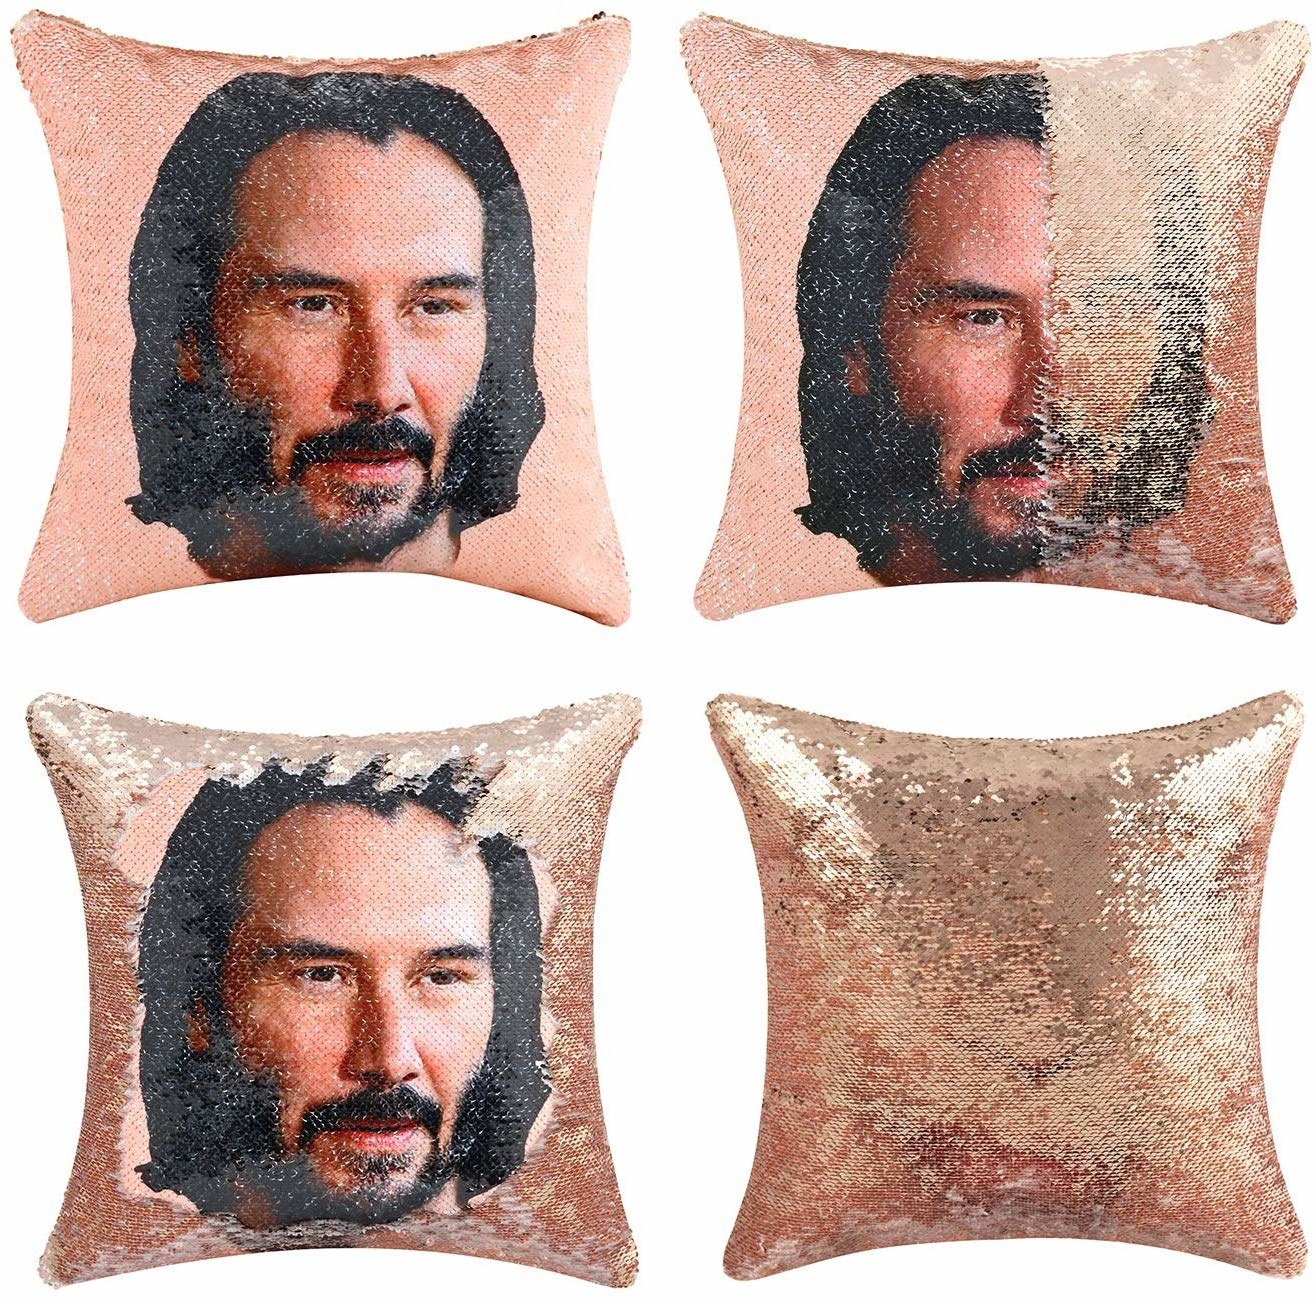 The pillow in four photos showing the sequence from solid gold to keanu&#x27;s face